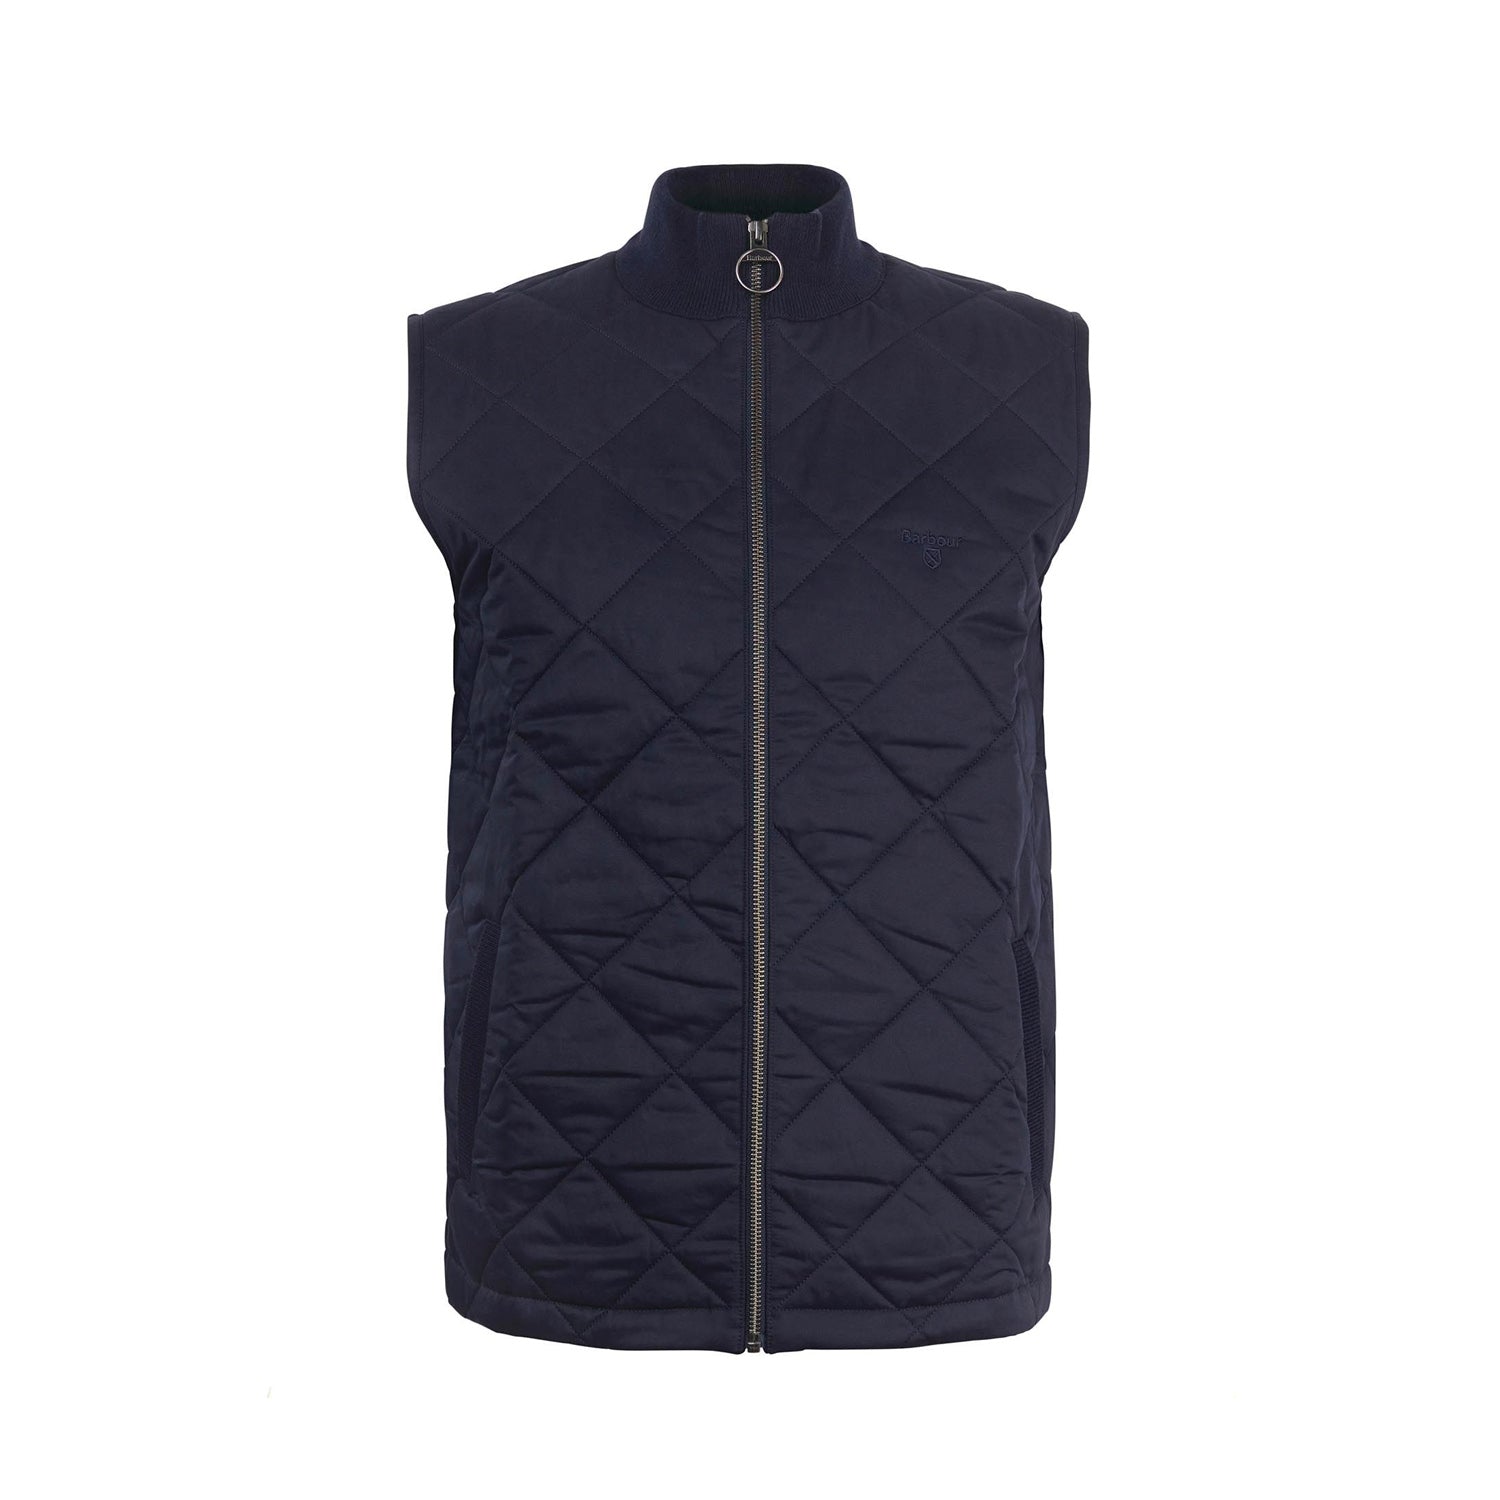 Essential Box Quilt Gilet NAVY
A must-have layering piece for outdoor enthusiasts and city dwellers alike, the Barbour Essential Box Quilt Gilet combines padded warmth to the front with a stylish wool-blend panel to the reverse. With a lightly brushed finish and logo embroidery to the chest, it delivers a premium look from the waist up. BARBOUR